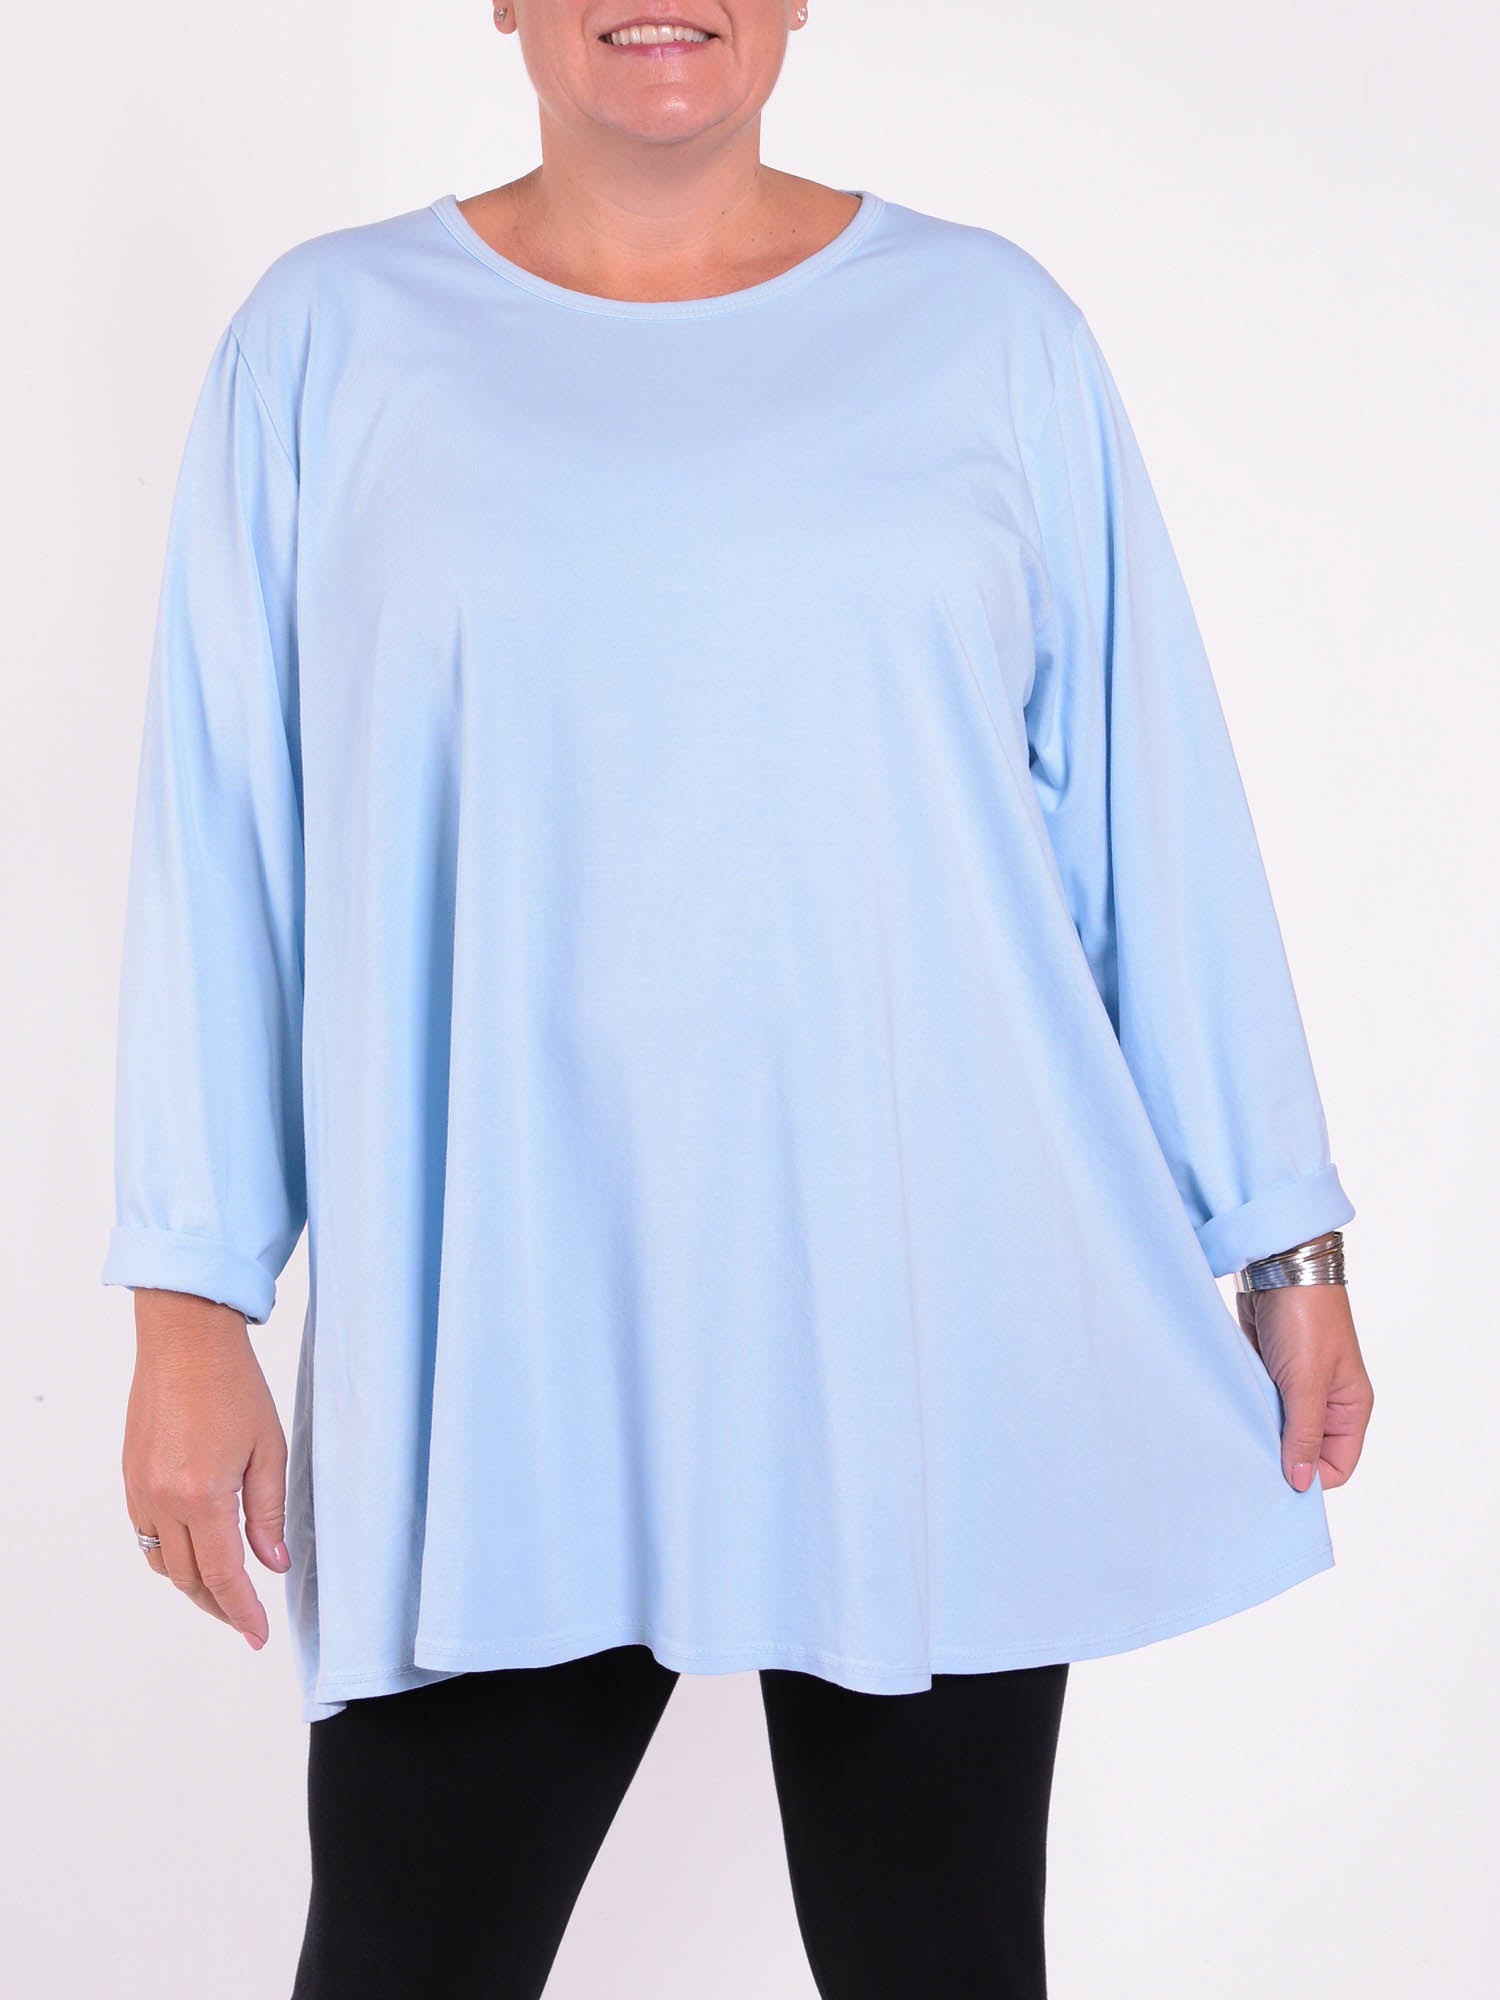 Cotton Swing Top - Round Neck 20516 LONG SLEEVE, Tops & Shirts, Pure Plus Clothing, Lagenlook Clothing, Plus Size Fashion, Over 50 Fashion